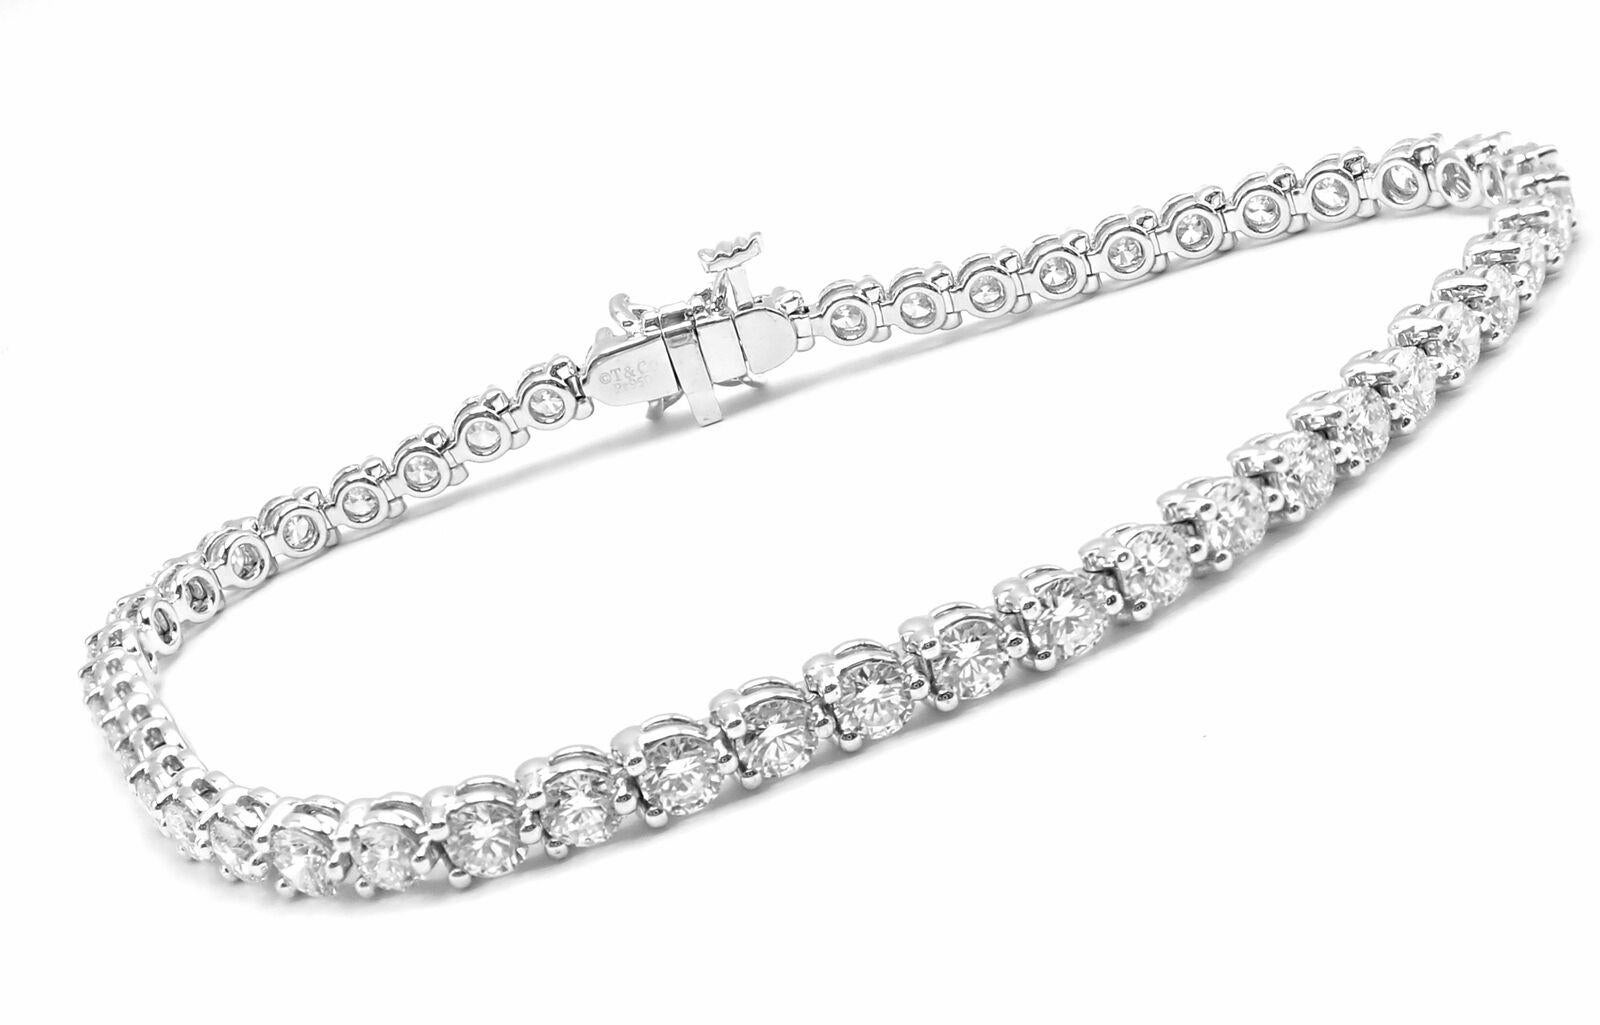 Platinum Diamond Line Tennis Bracelet by Tiffany & Co from Victoria collection.
With 47 round brilliant cut diamonds VS1 clarity, E color total weight approx. 4.24ct
4 marque cut diamonds .24ct
This bracelet comes with an appraisal from Tiffany & Co